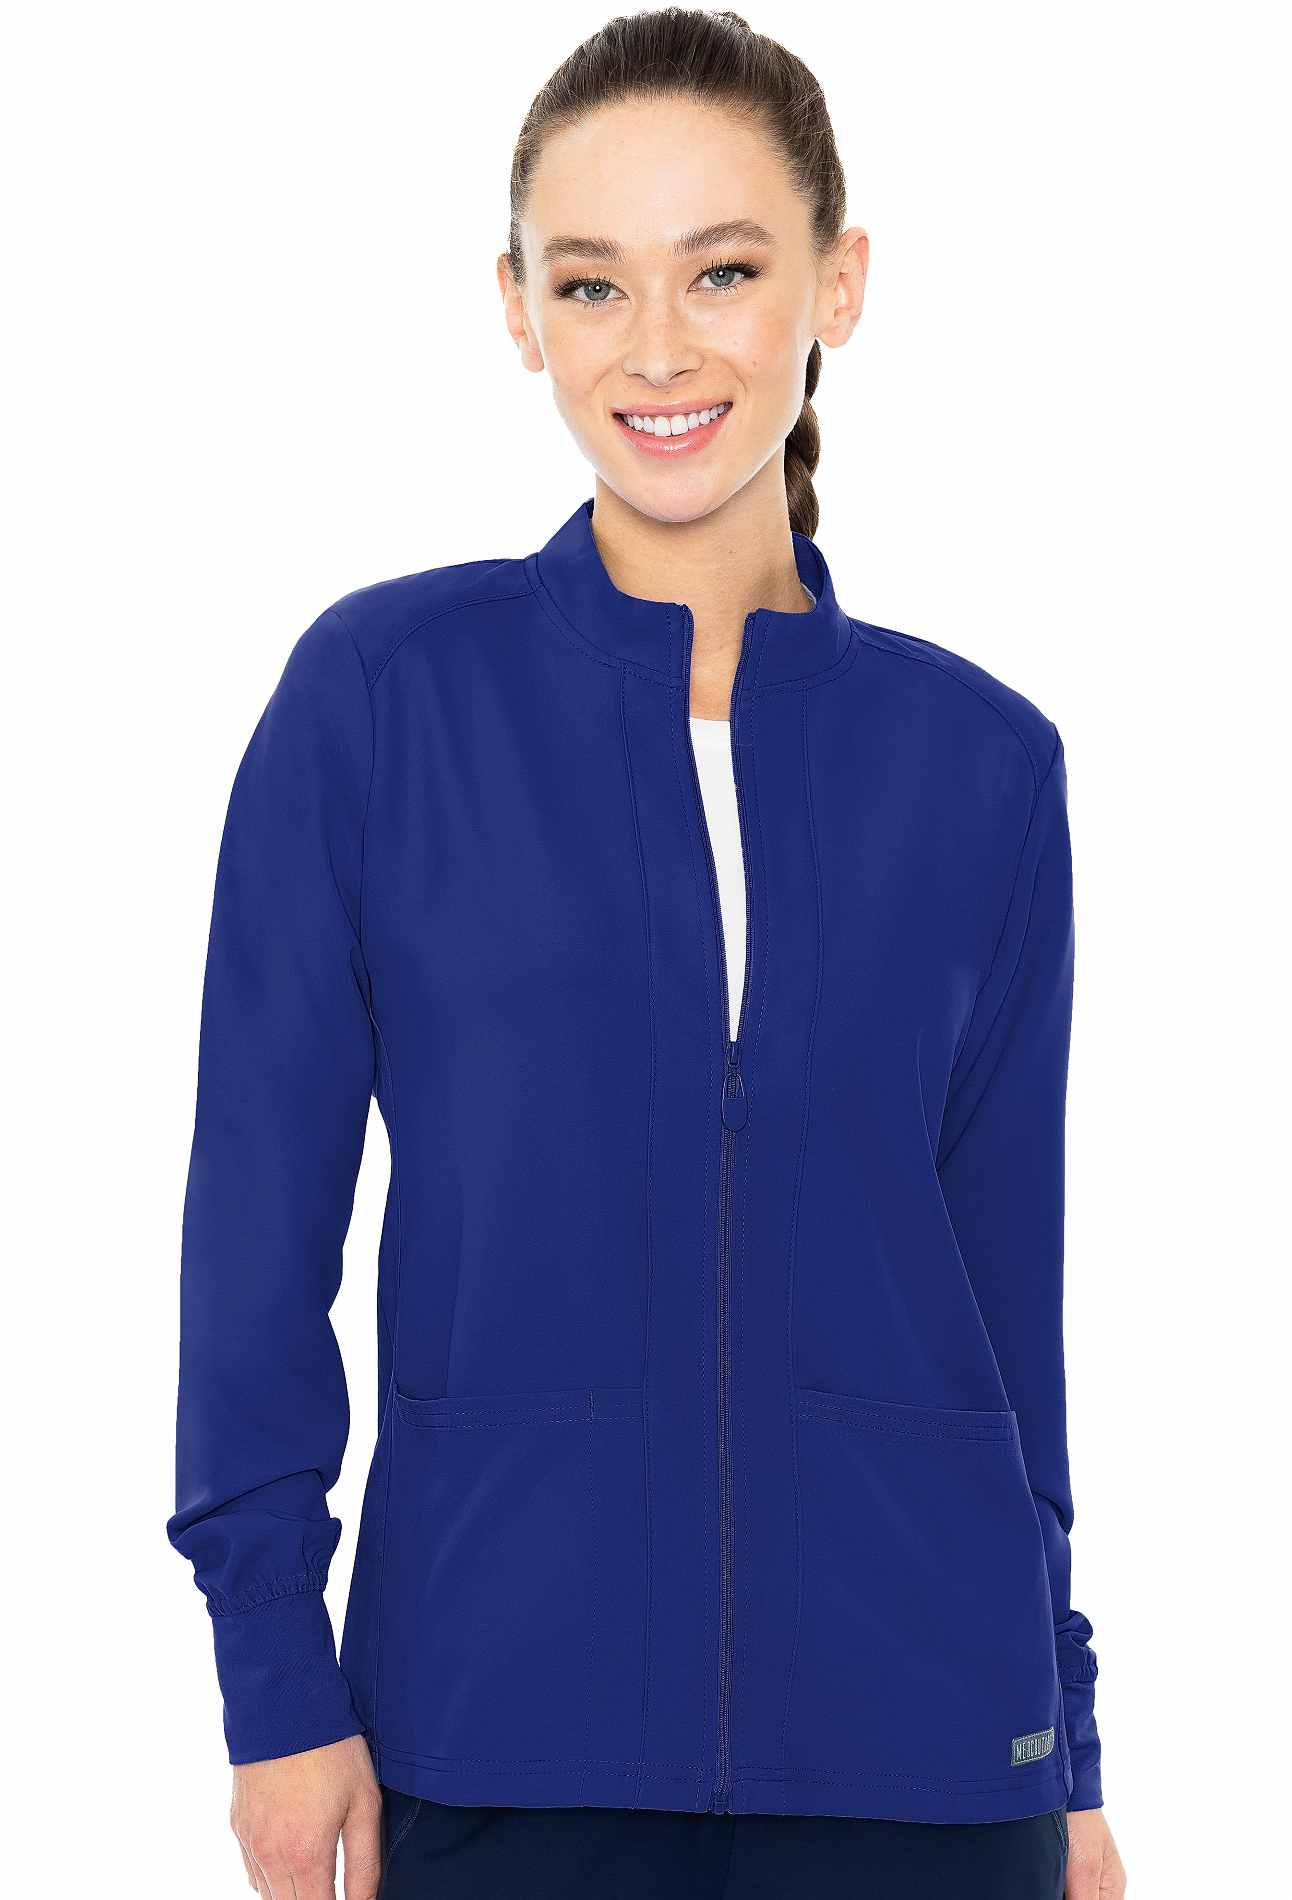 Med Couture Insight Women's Zip Front Warm-Up With Shoulder Yokes-2660